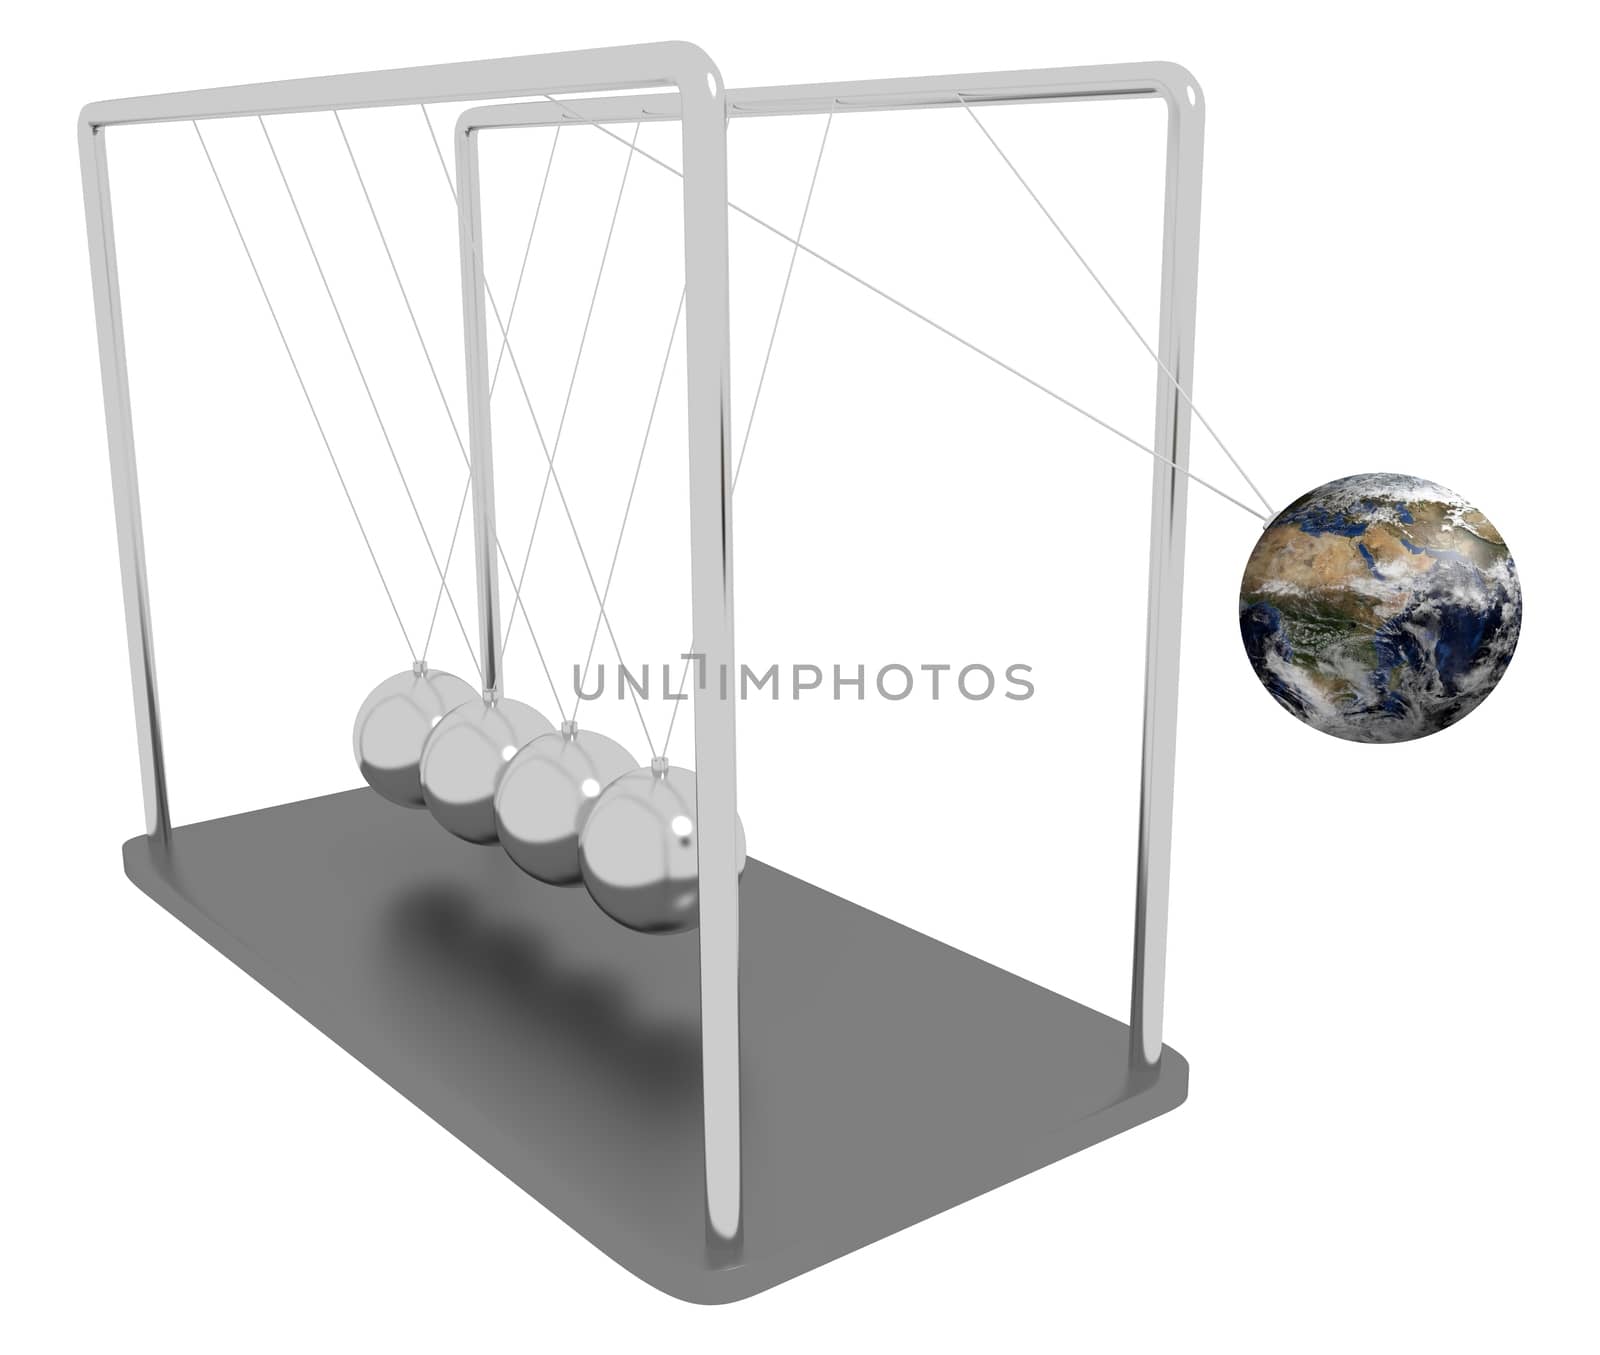 Illustration of Newtons Cradle with one of the spheres replaced with planet Earth